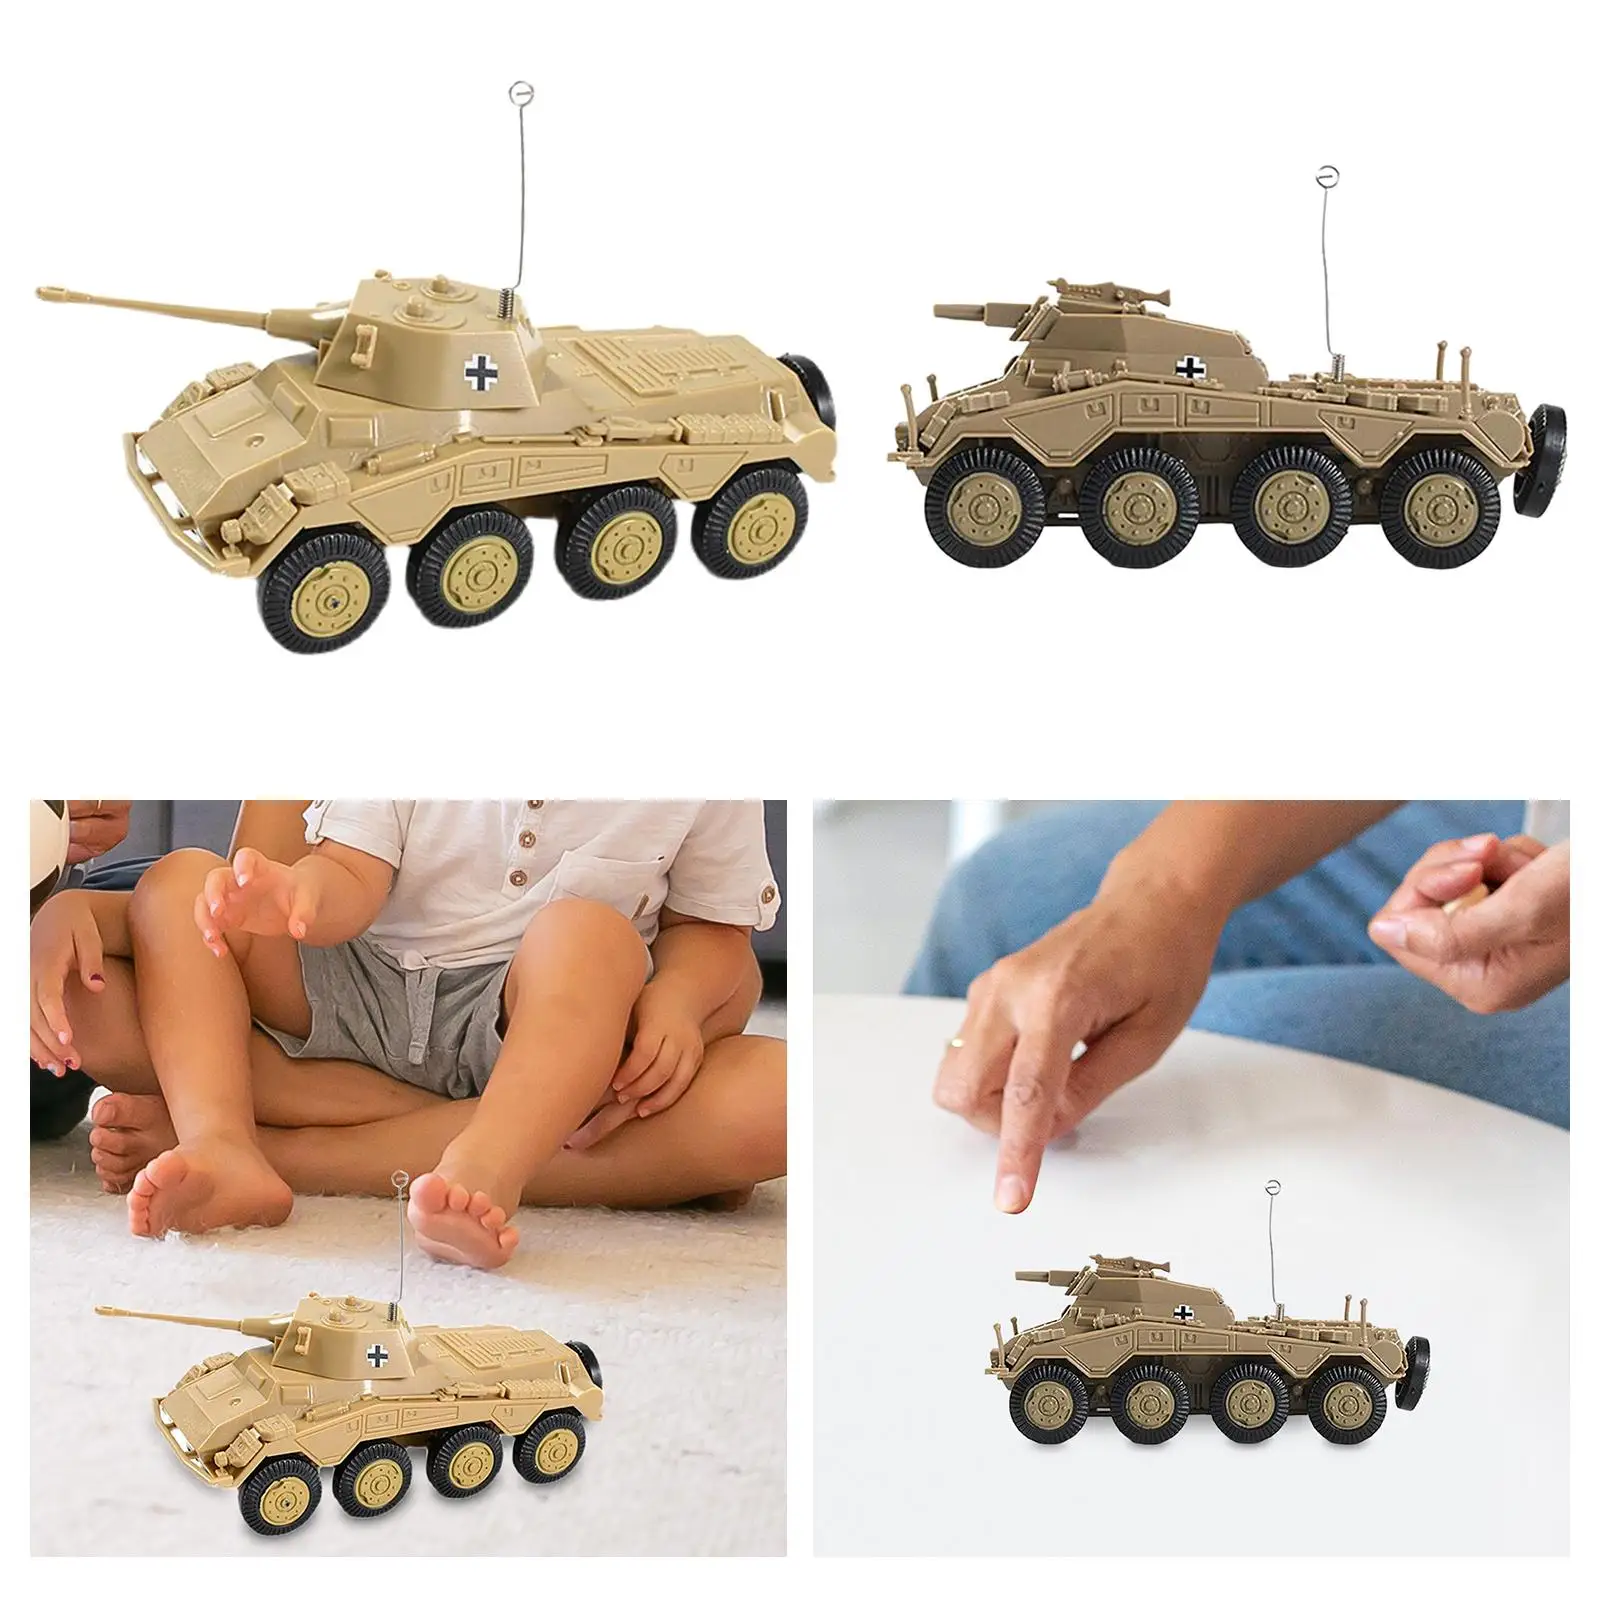 Simulation 1/72 German Tank Model Armored Vehicle Vehicle Collectible Cars for Learning Party Decor DIY Activity Holiday Gift